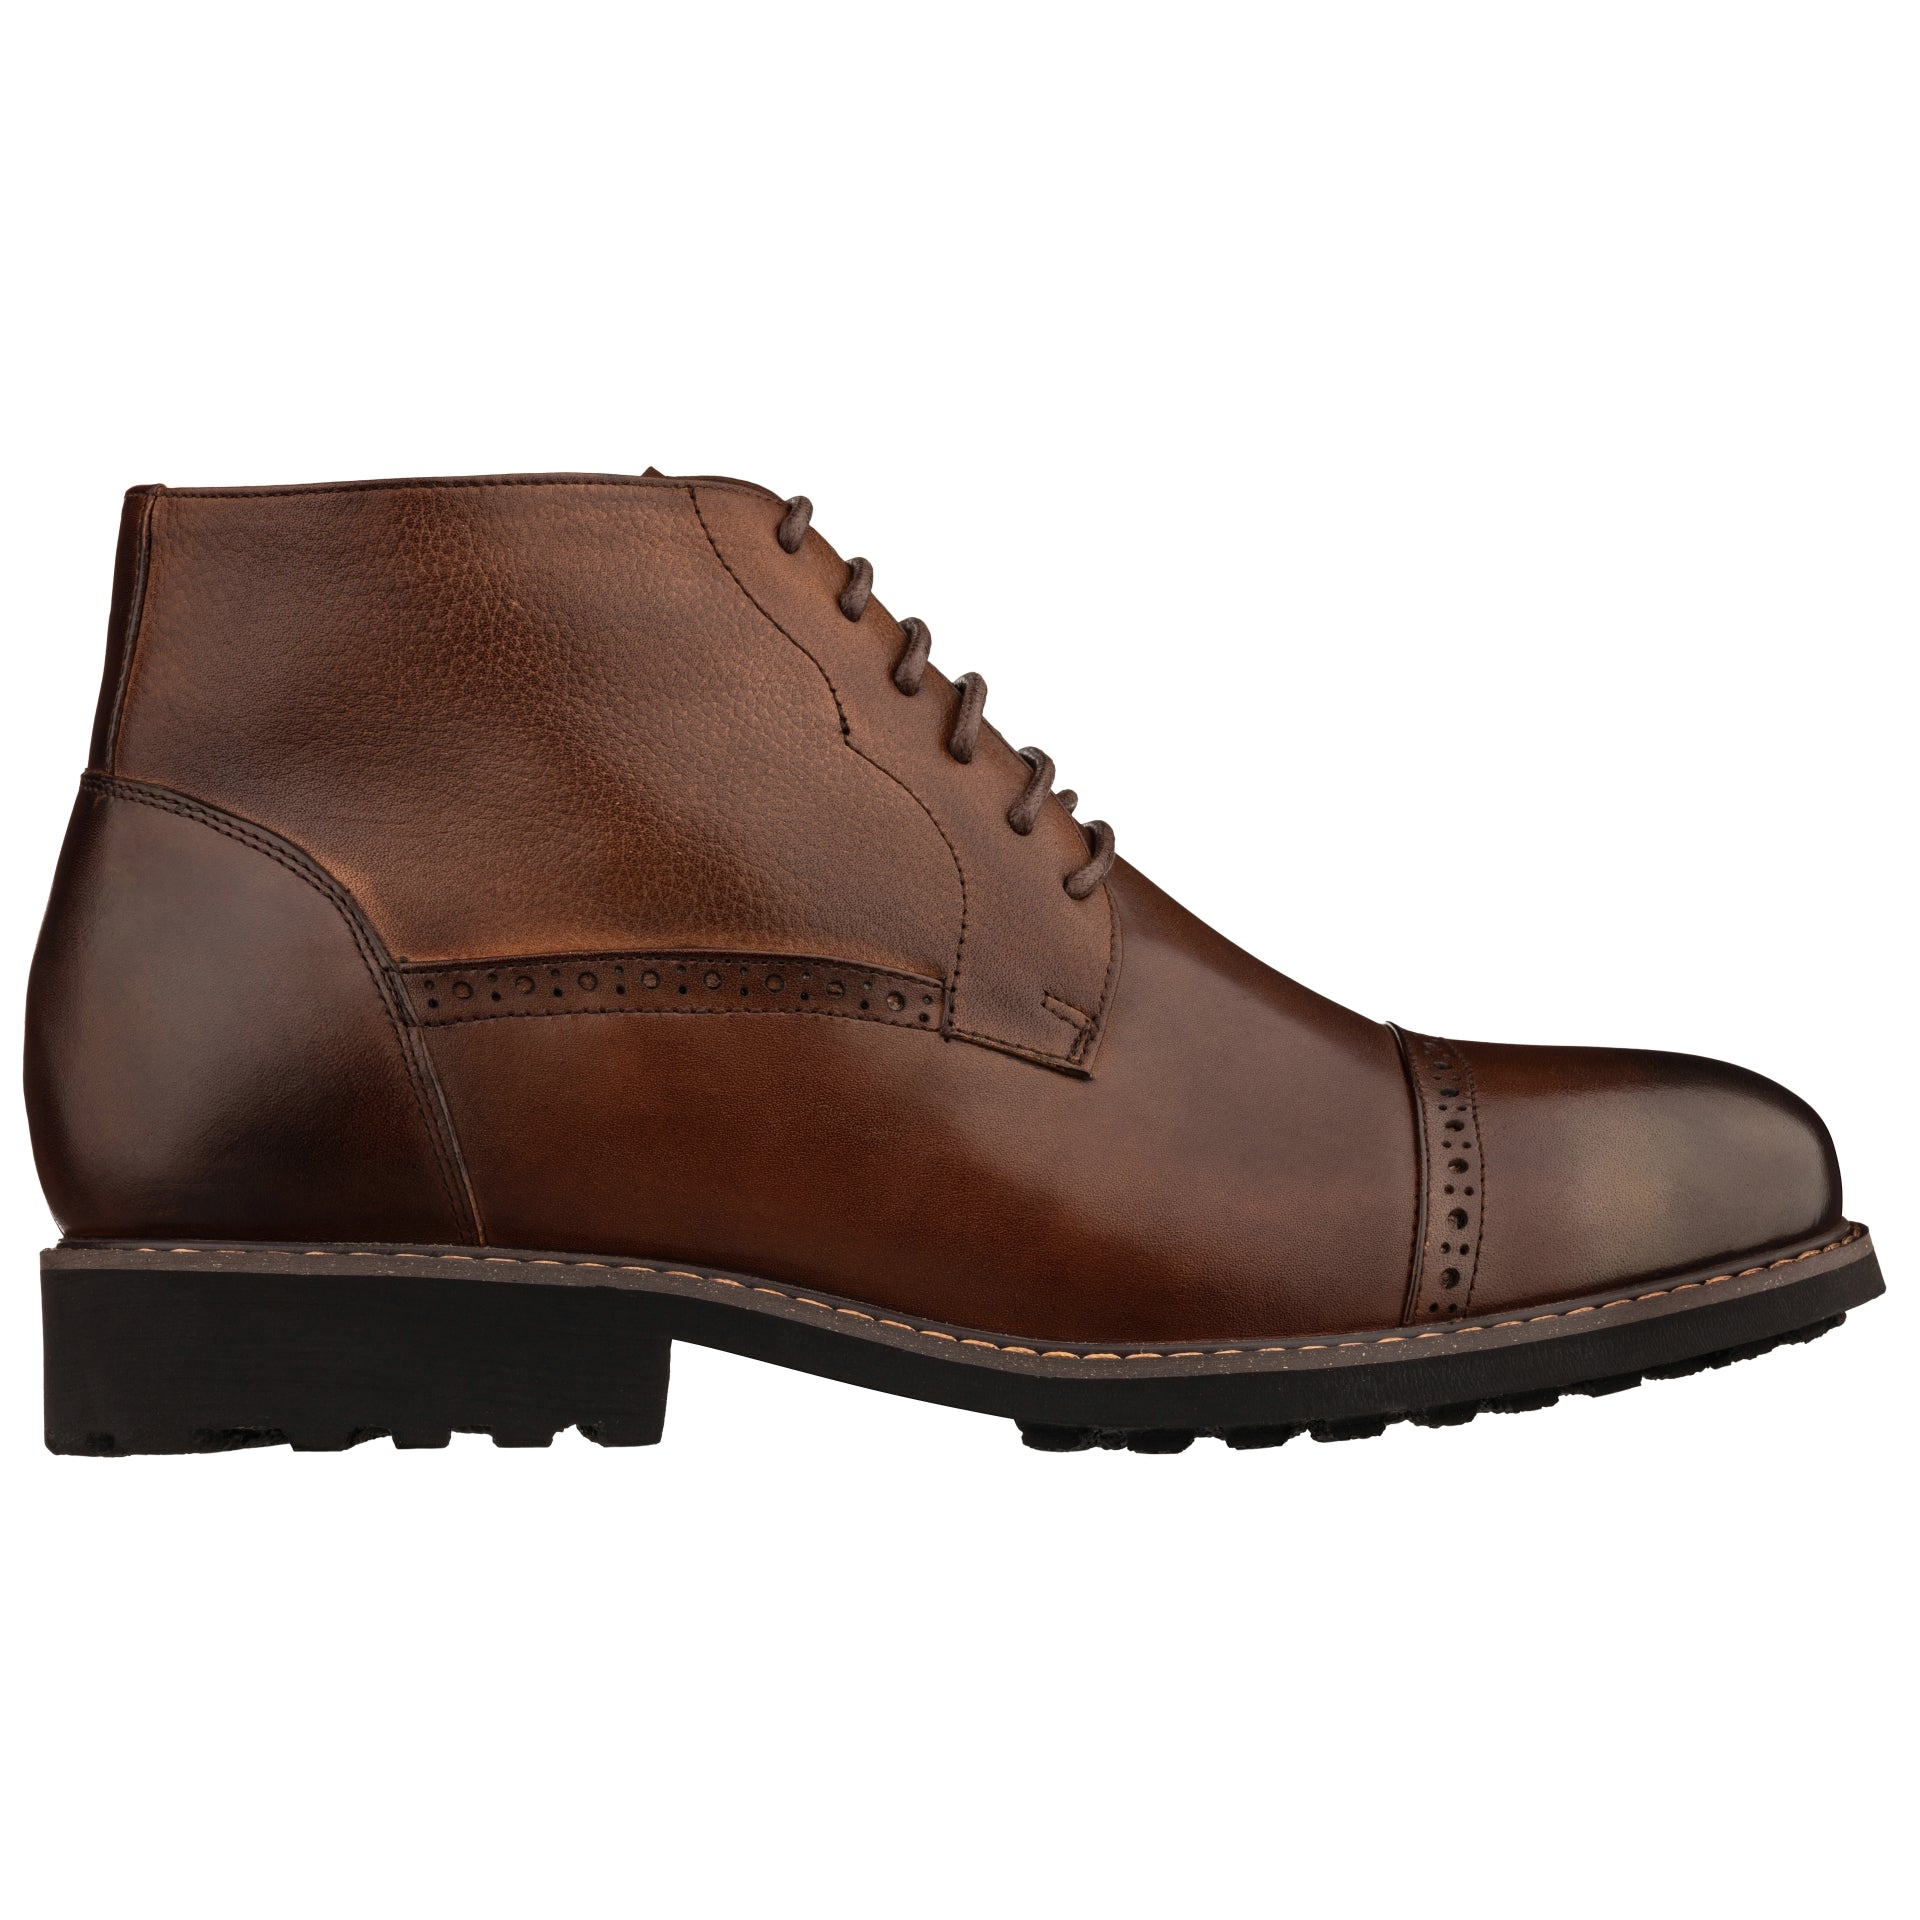 Elevator shoes height increase CALTO - Y41084 - 3.2 Inches Taller (Coffee Brown) - Lace Up Casual Boots